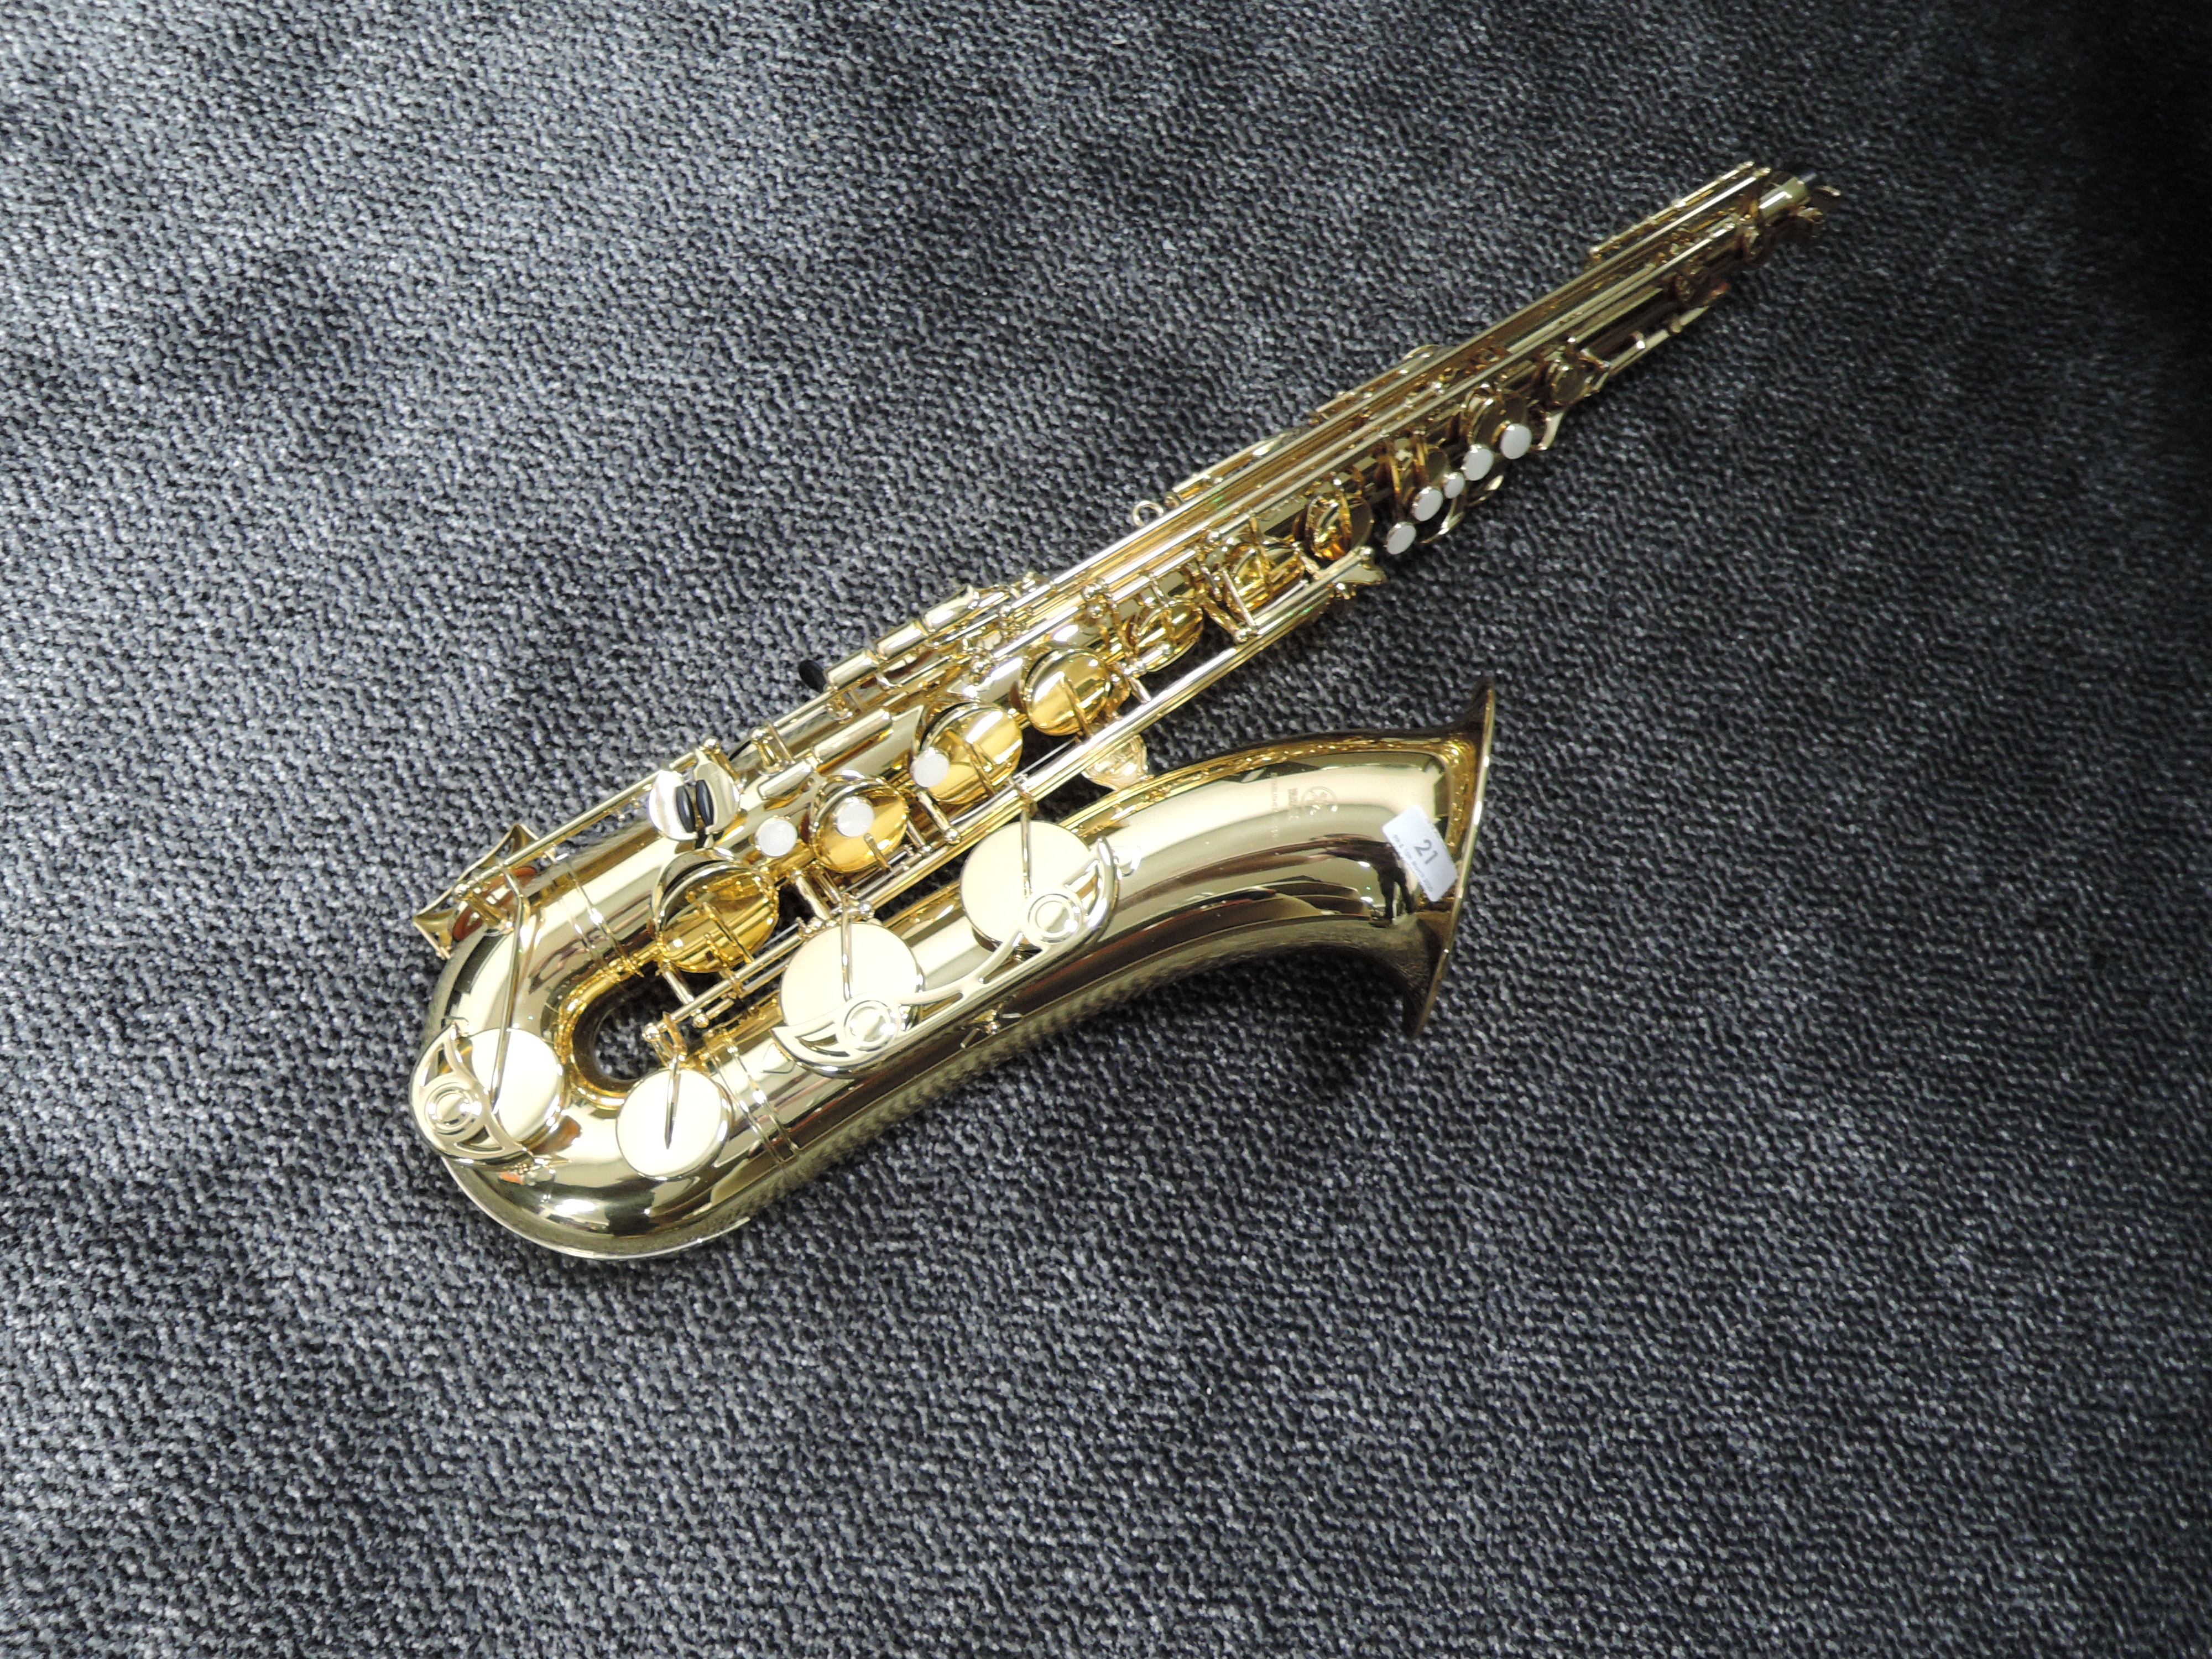 A Yamaha Tenor saxophone, in fitted yamaha case - Image 2 of 4